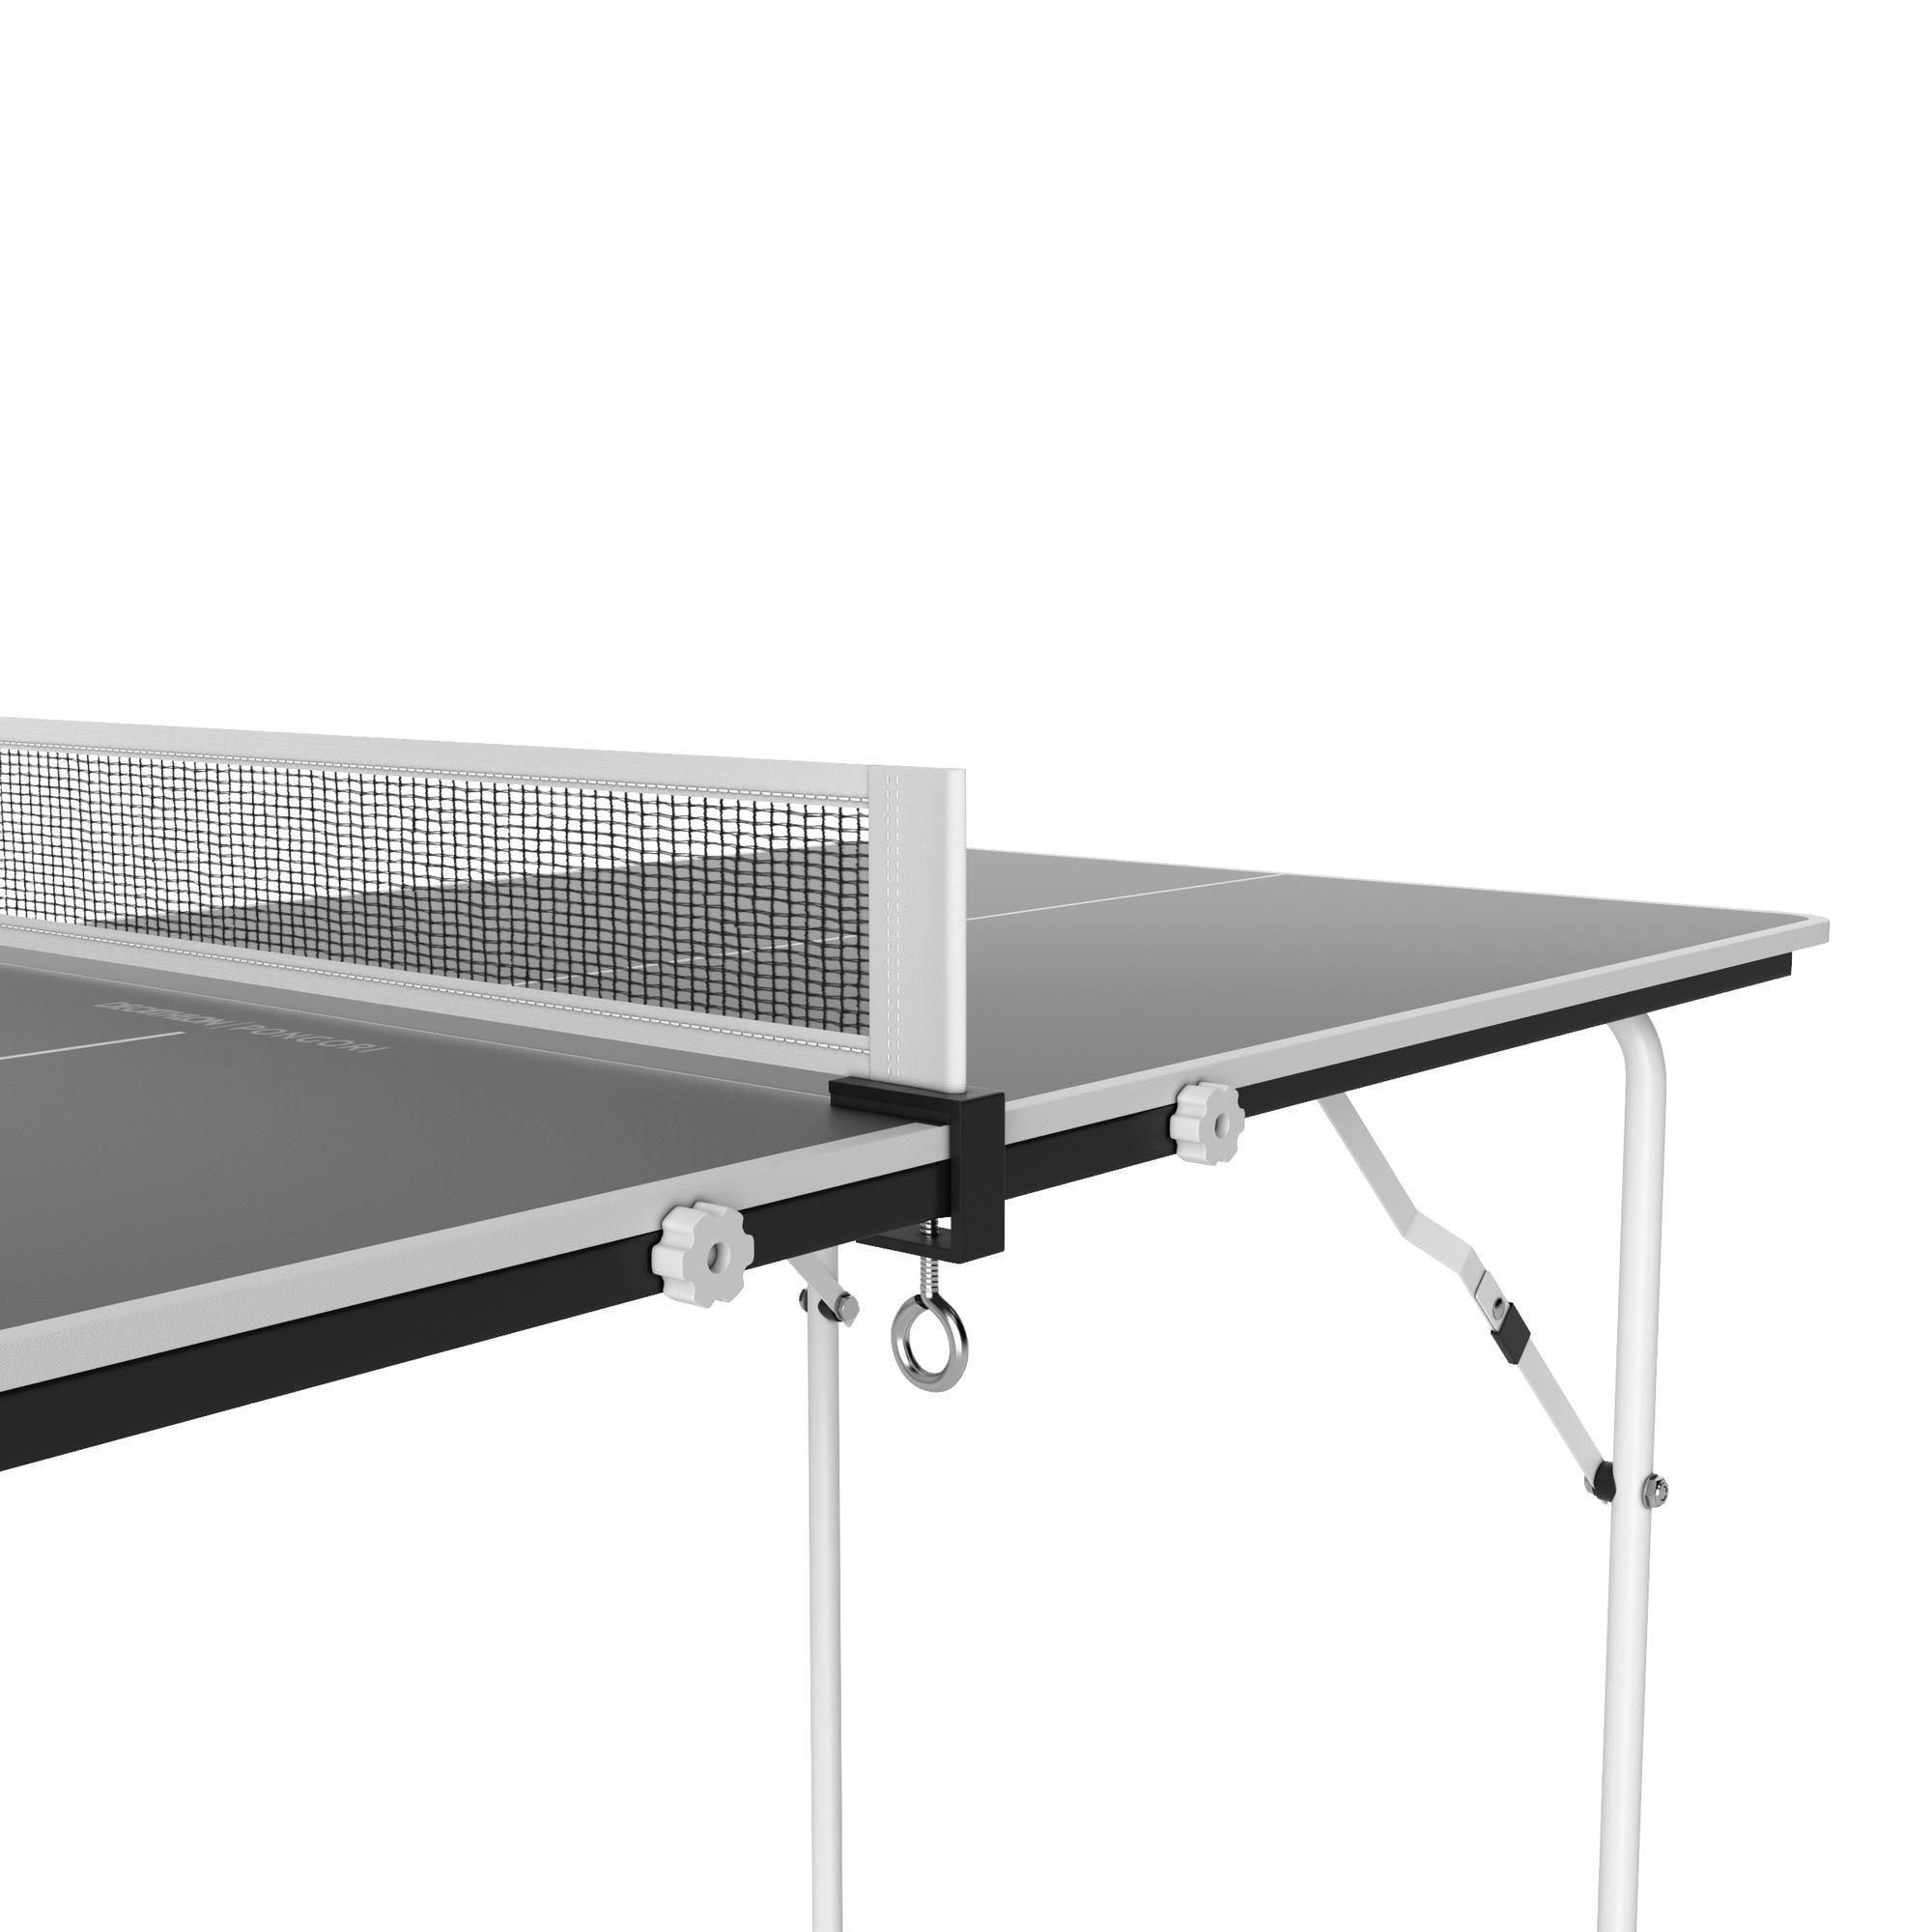 PPT 130 Small Free Indoor Table Tennis 